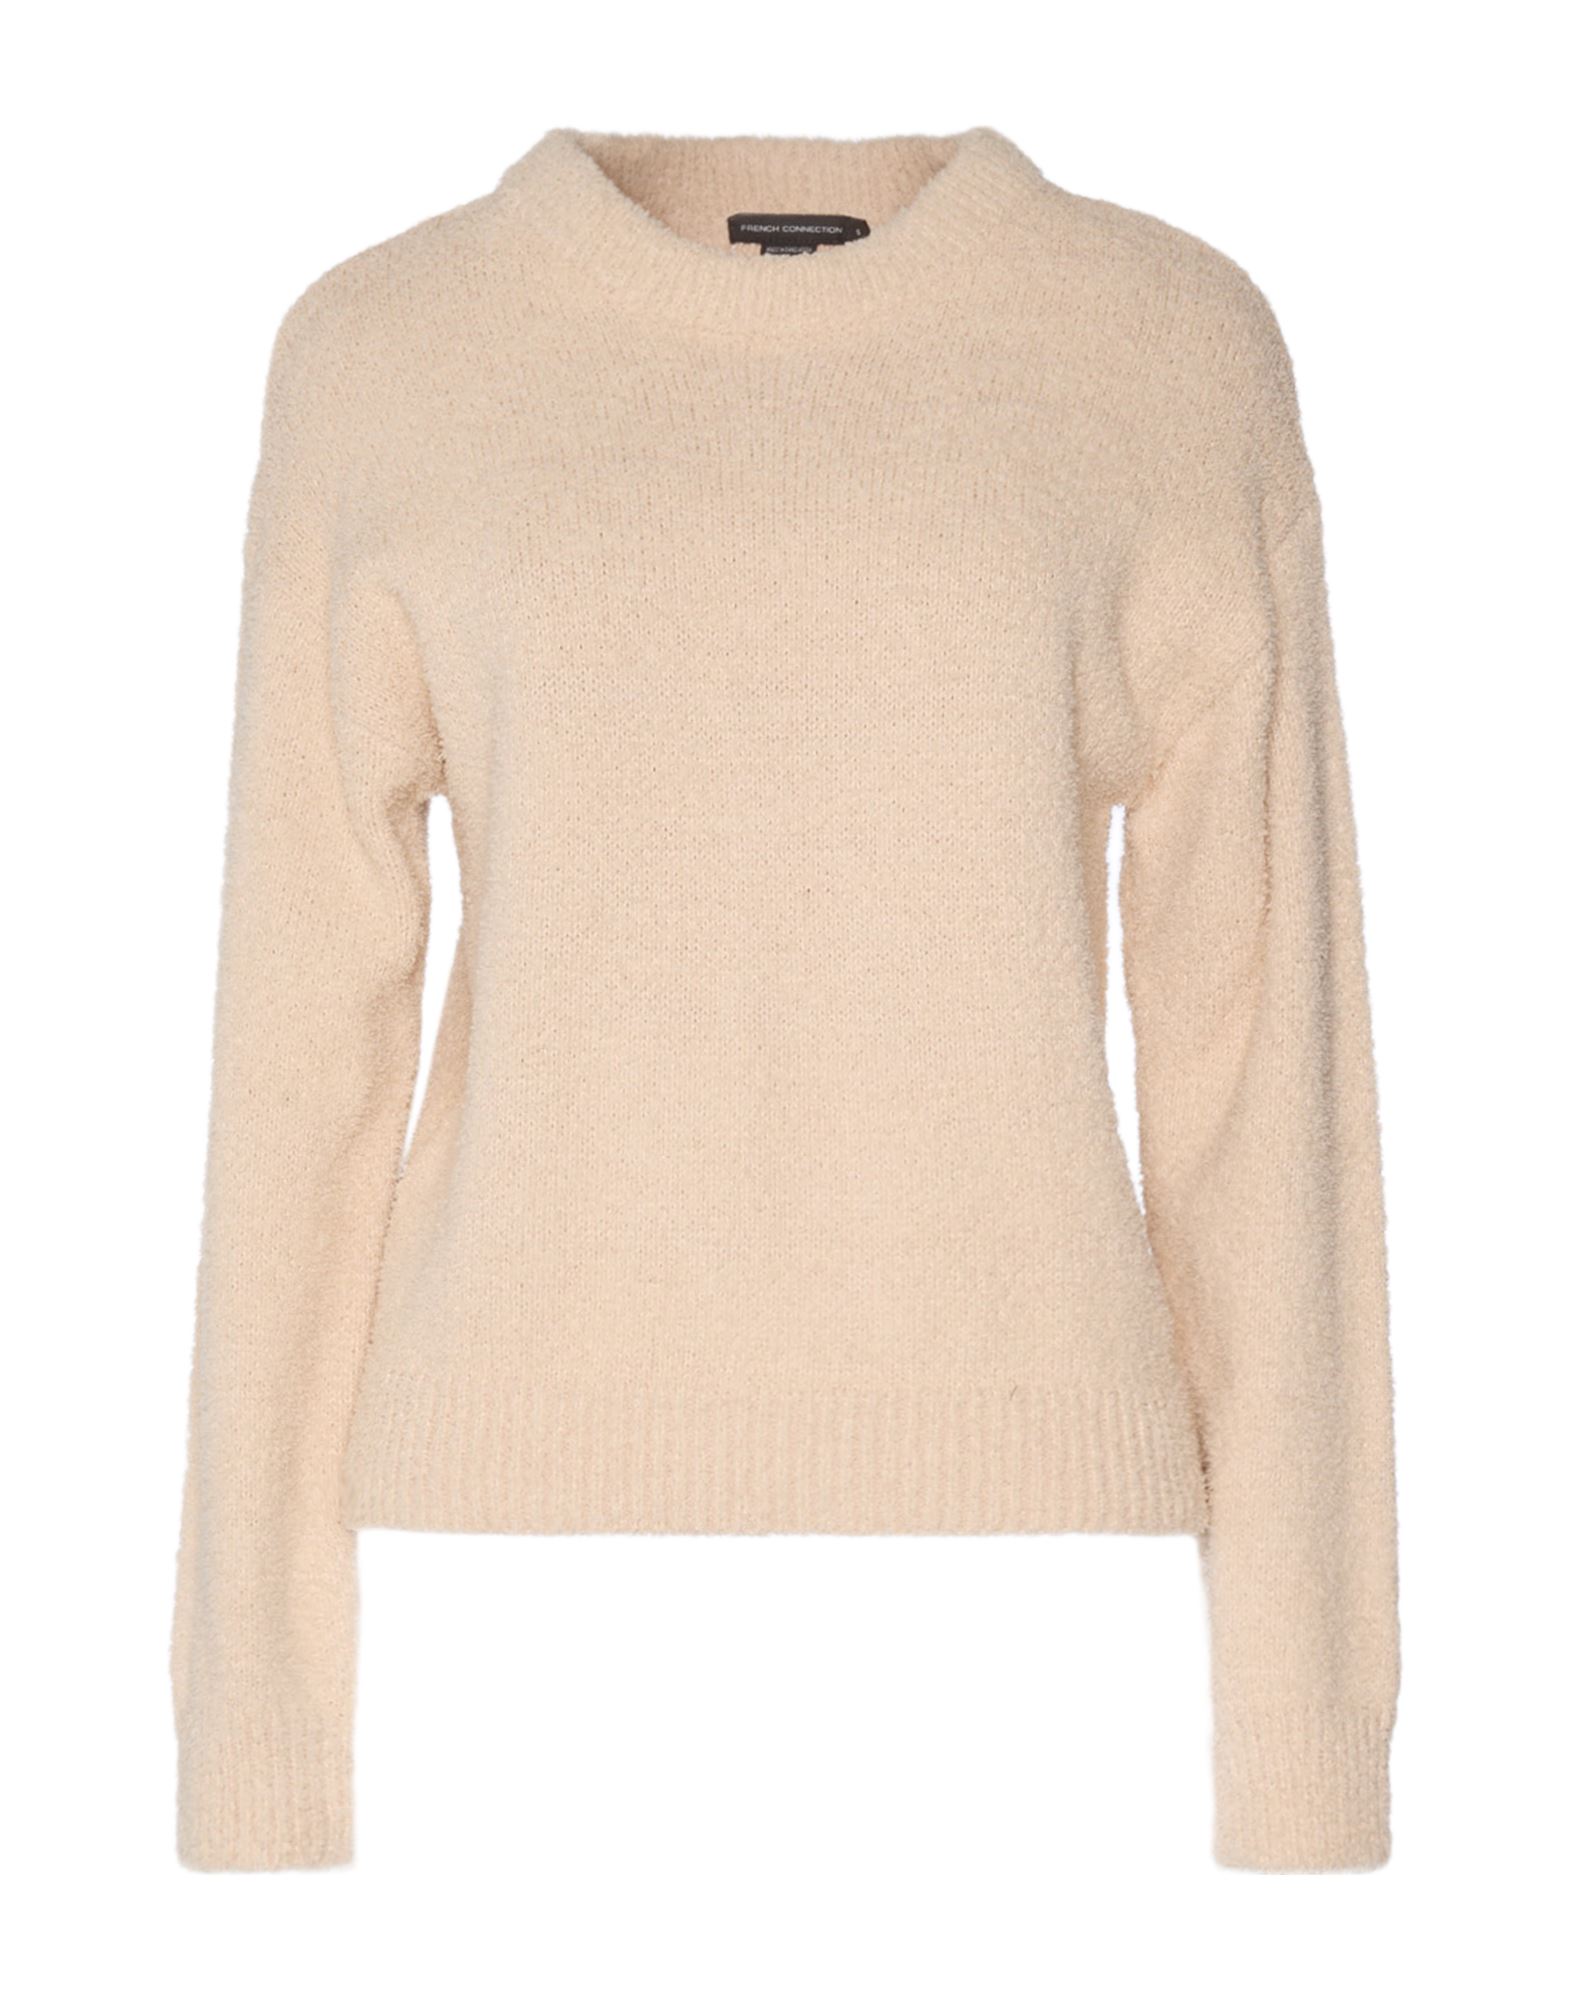 FRENCH CONNECTION Pullover Damen Sand von FRENCH CONNECTION